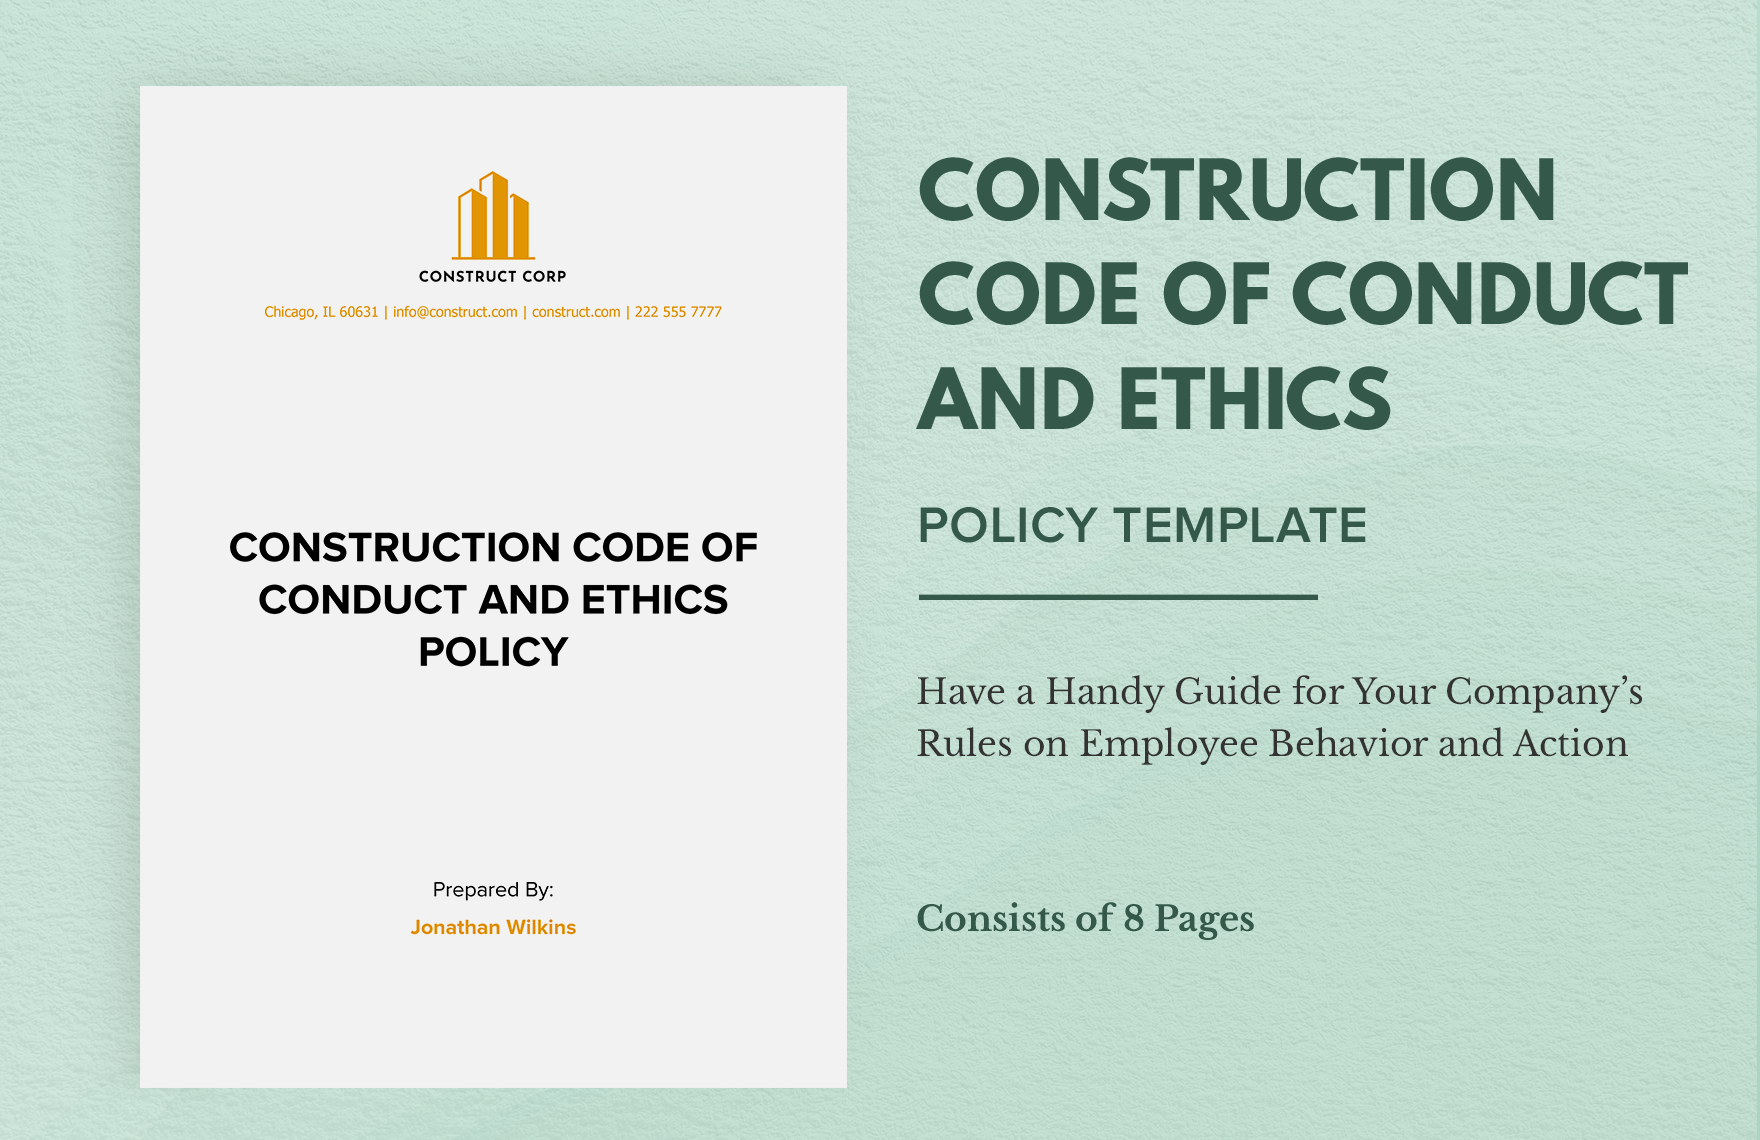 Construction Code of Conduct and Ethics Policy Template in Word, Google Docs